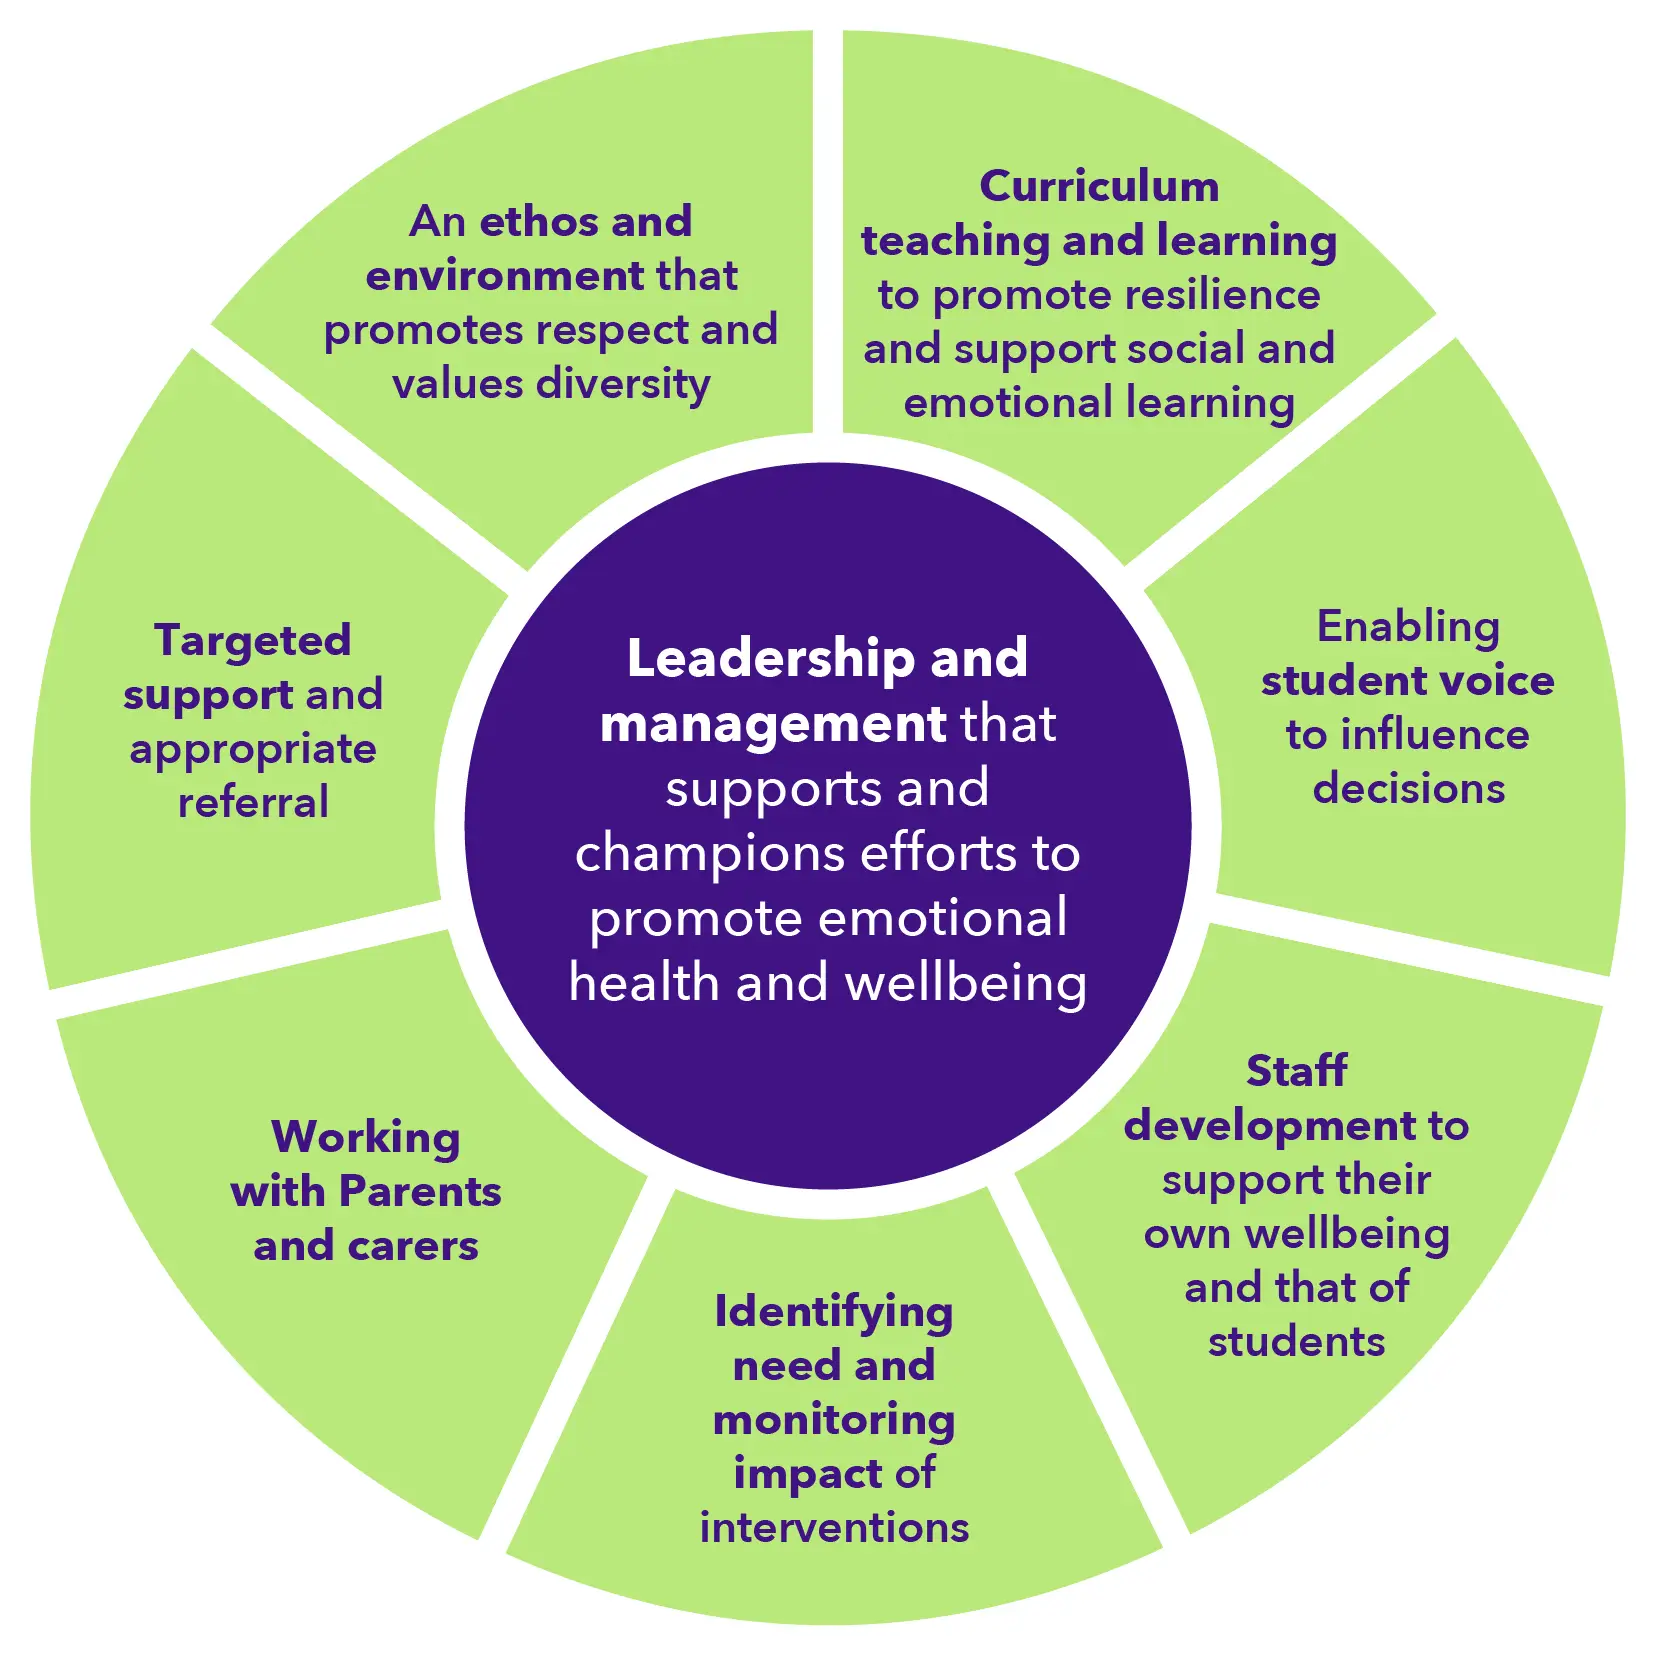 Leadership and management that supports and champions efforts to promote emotional health and wellbeing